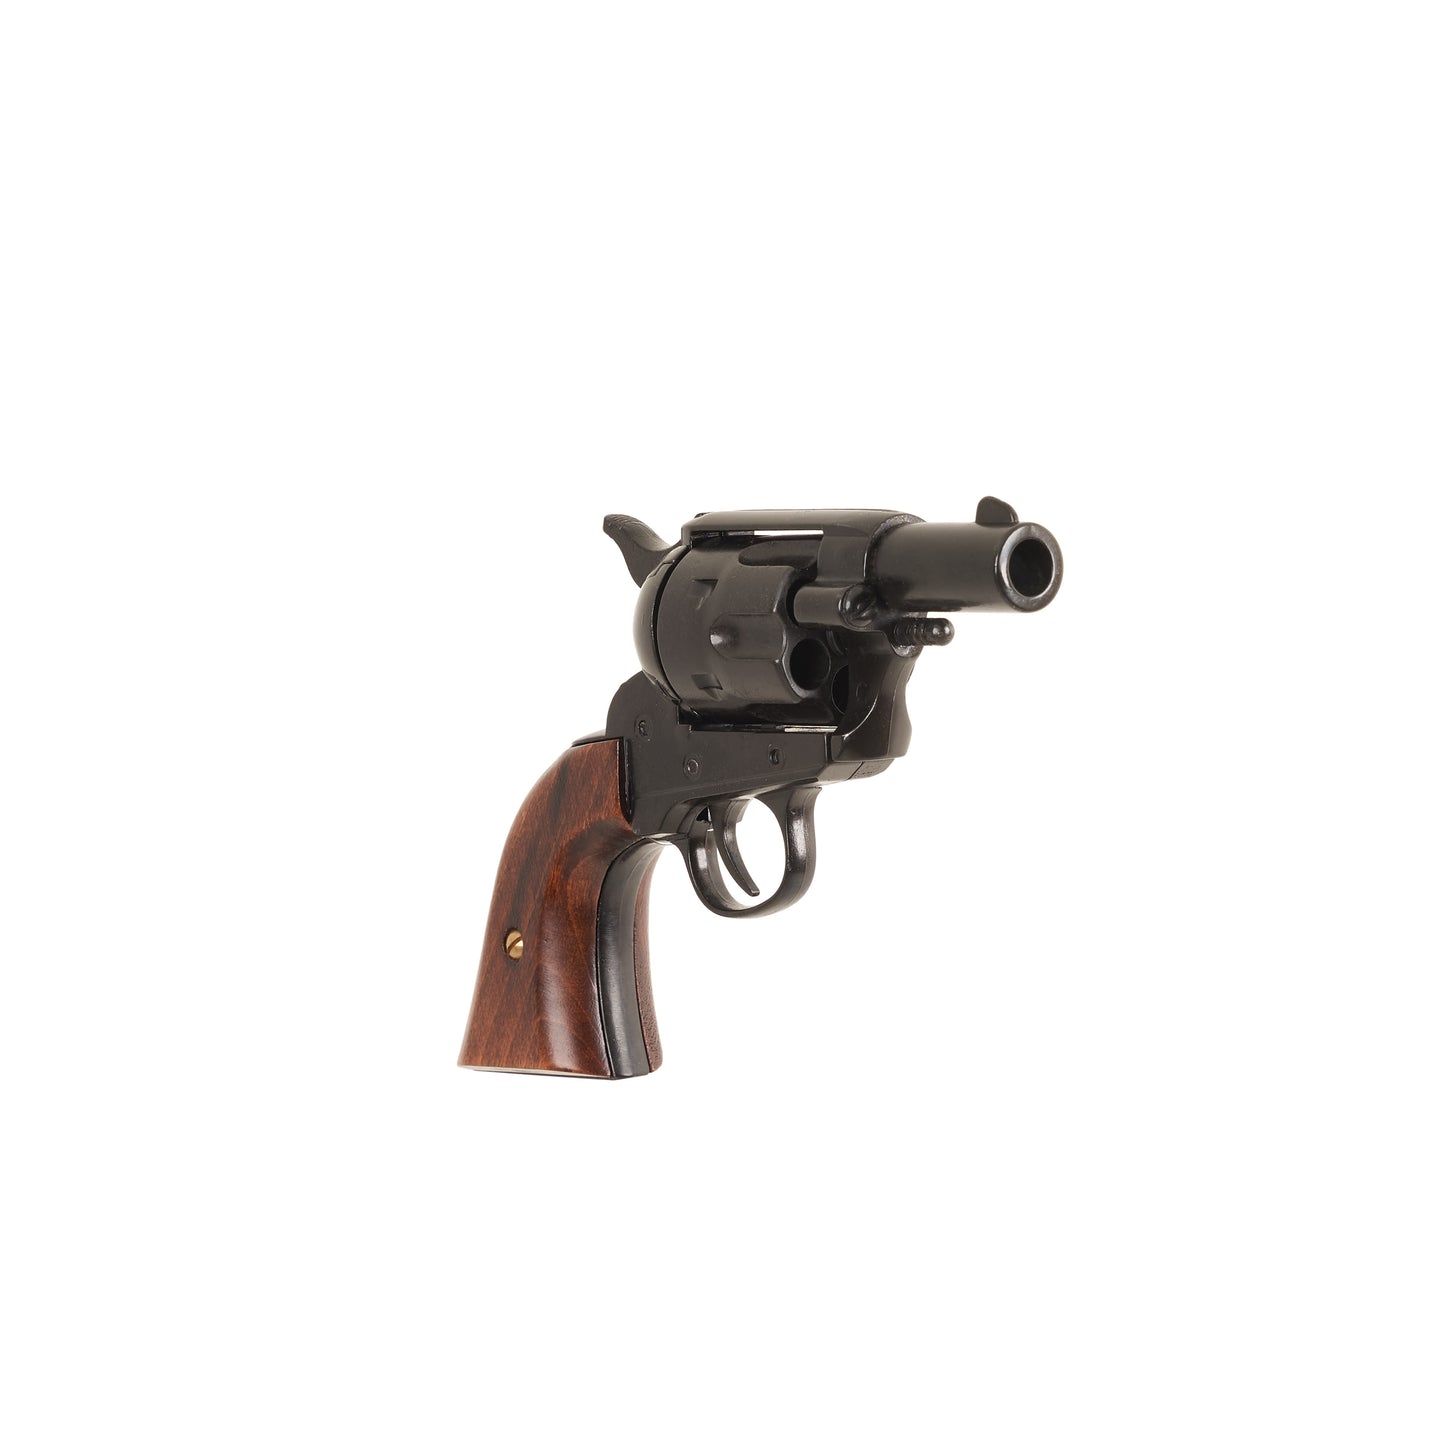 Front view of Black Non-Firing 1873 .45 Caliber Short Revolver with wood grip.